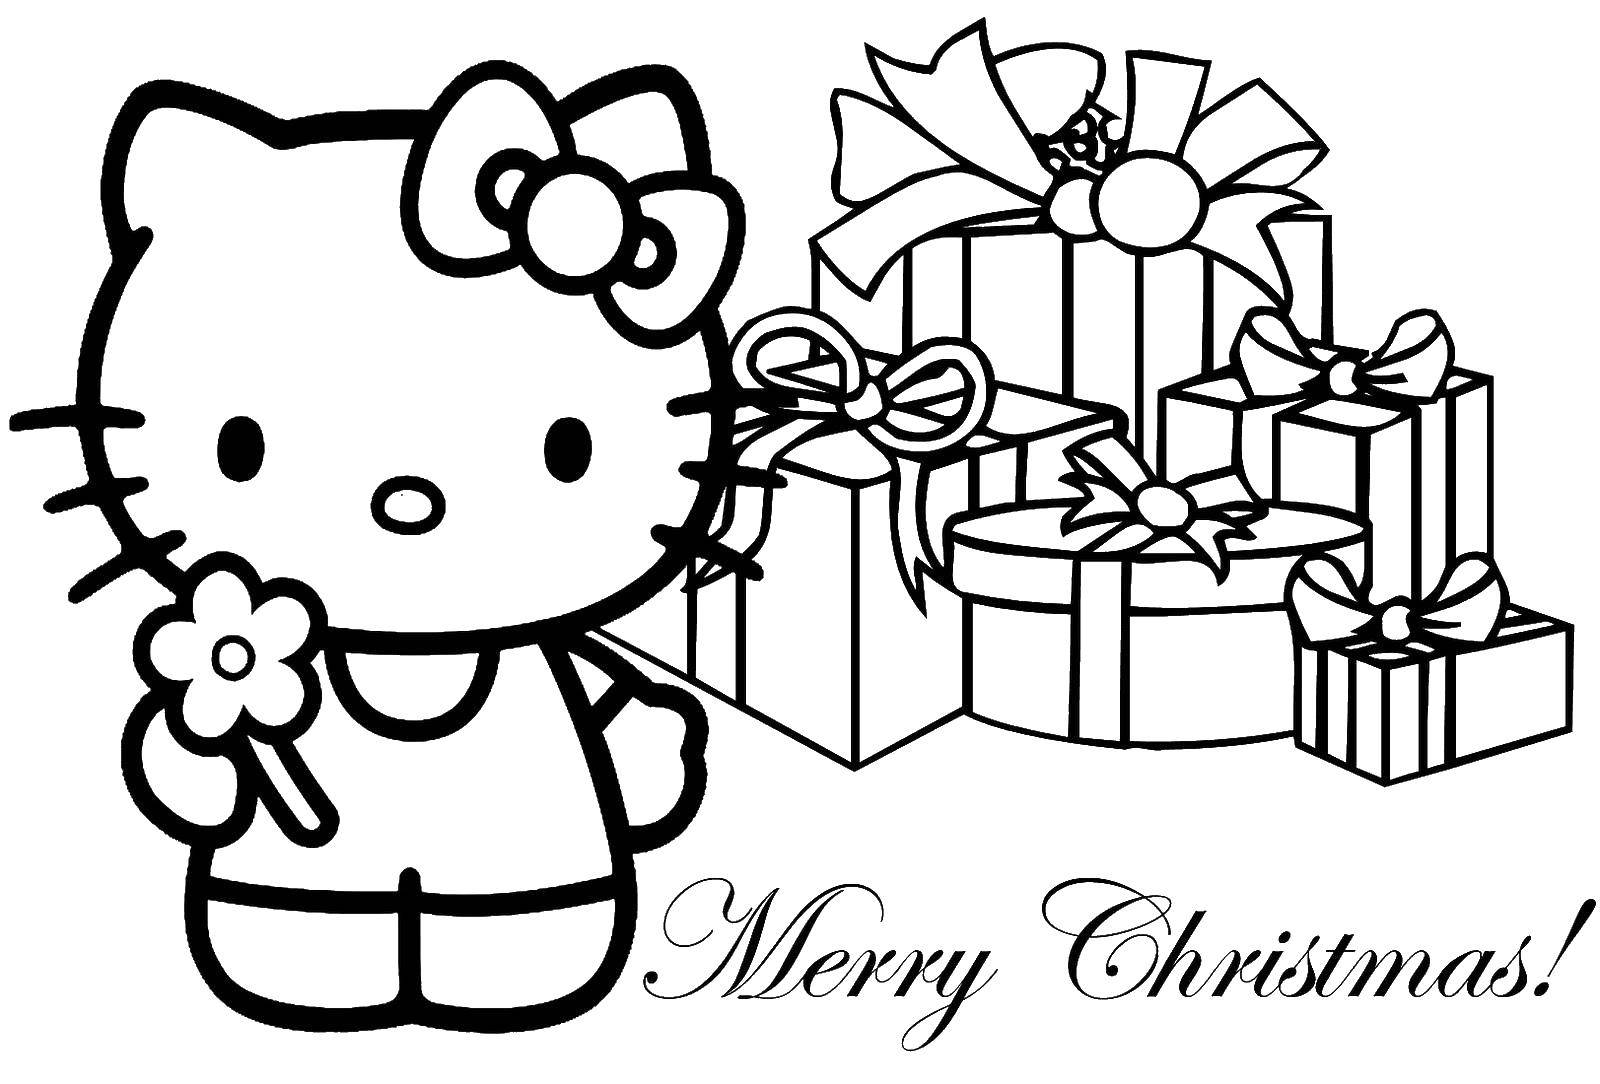 Coloring Kitty with Christmas gifts. Category Christmas. Tags:  Christmas, kitty.